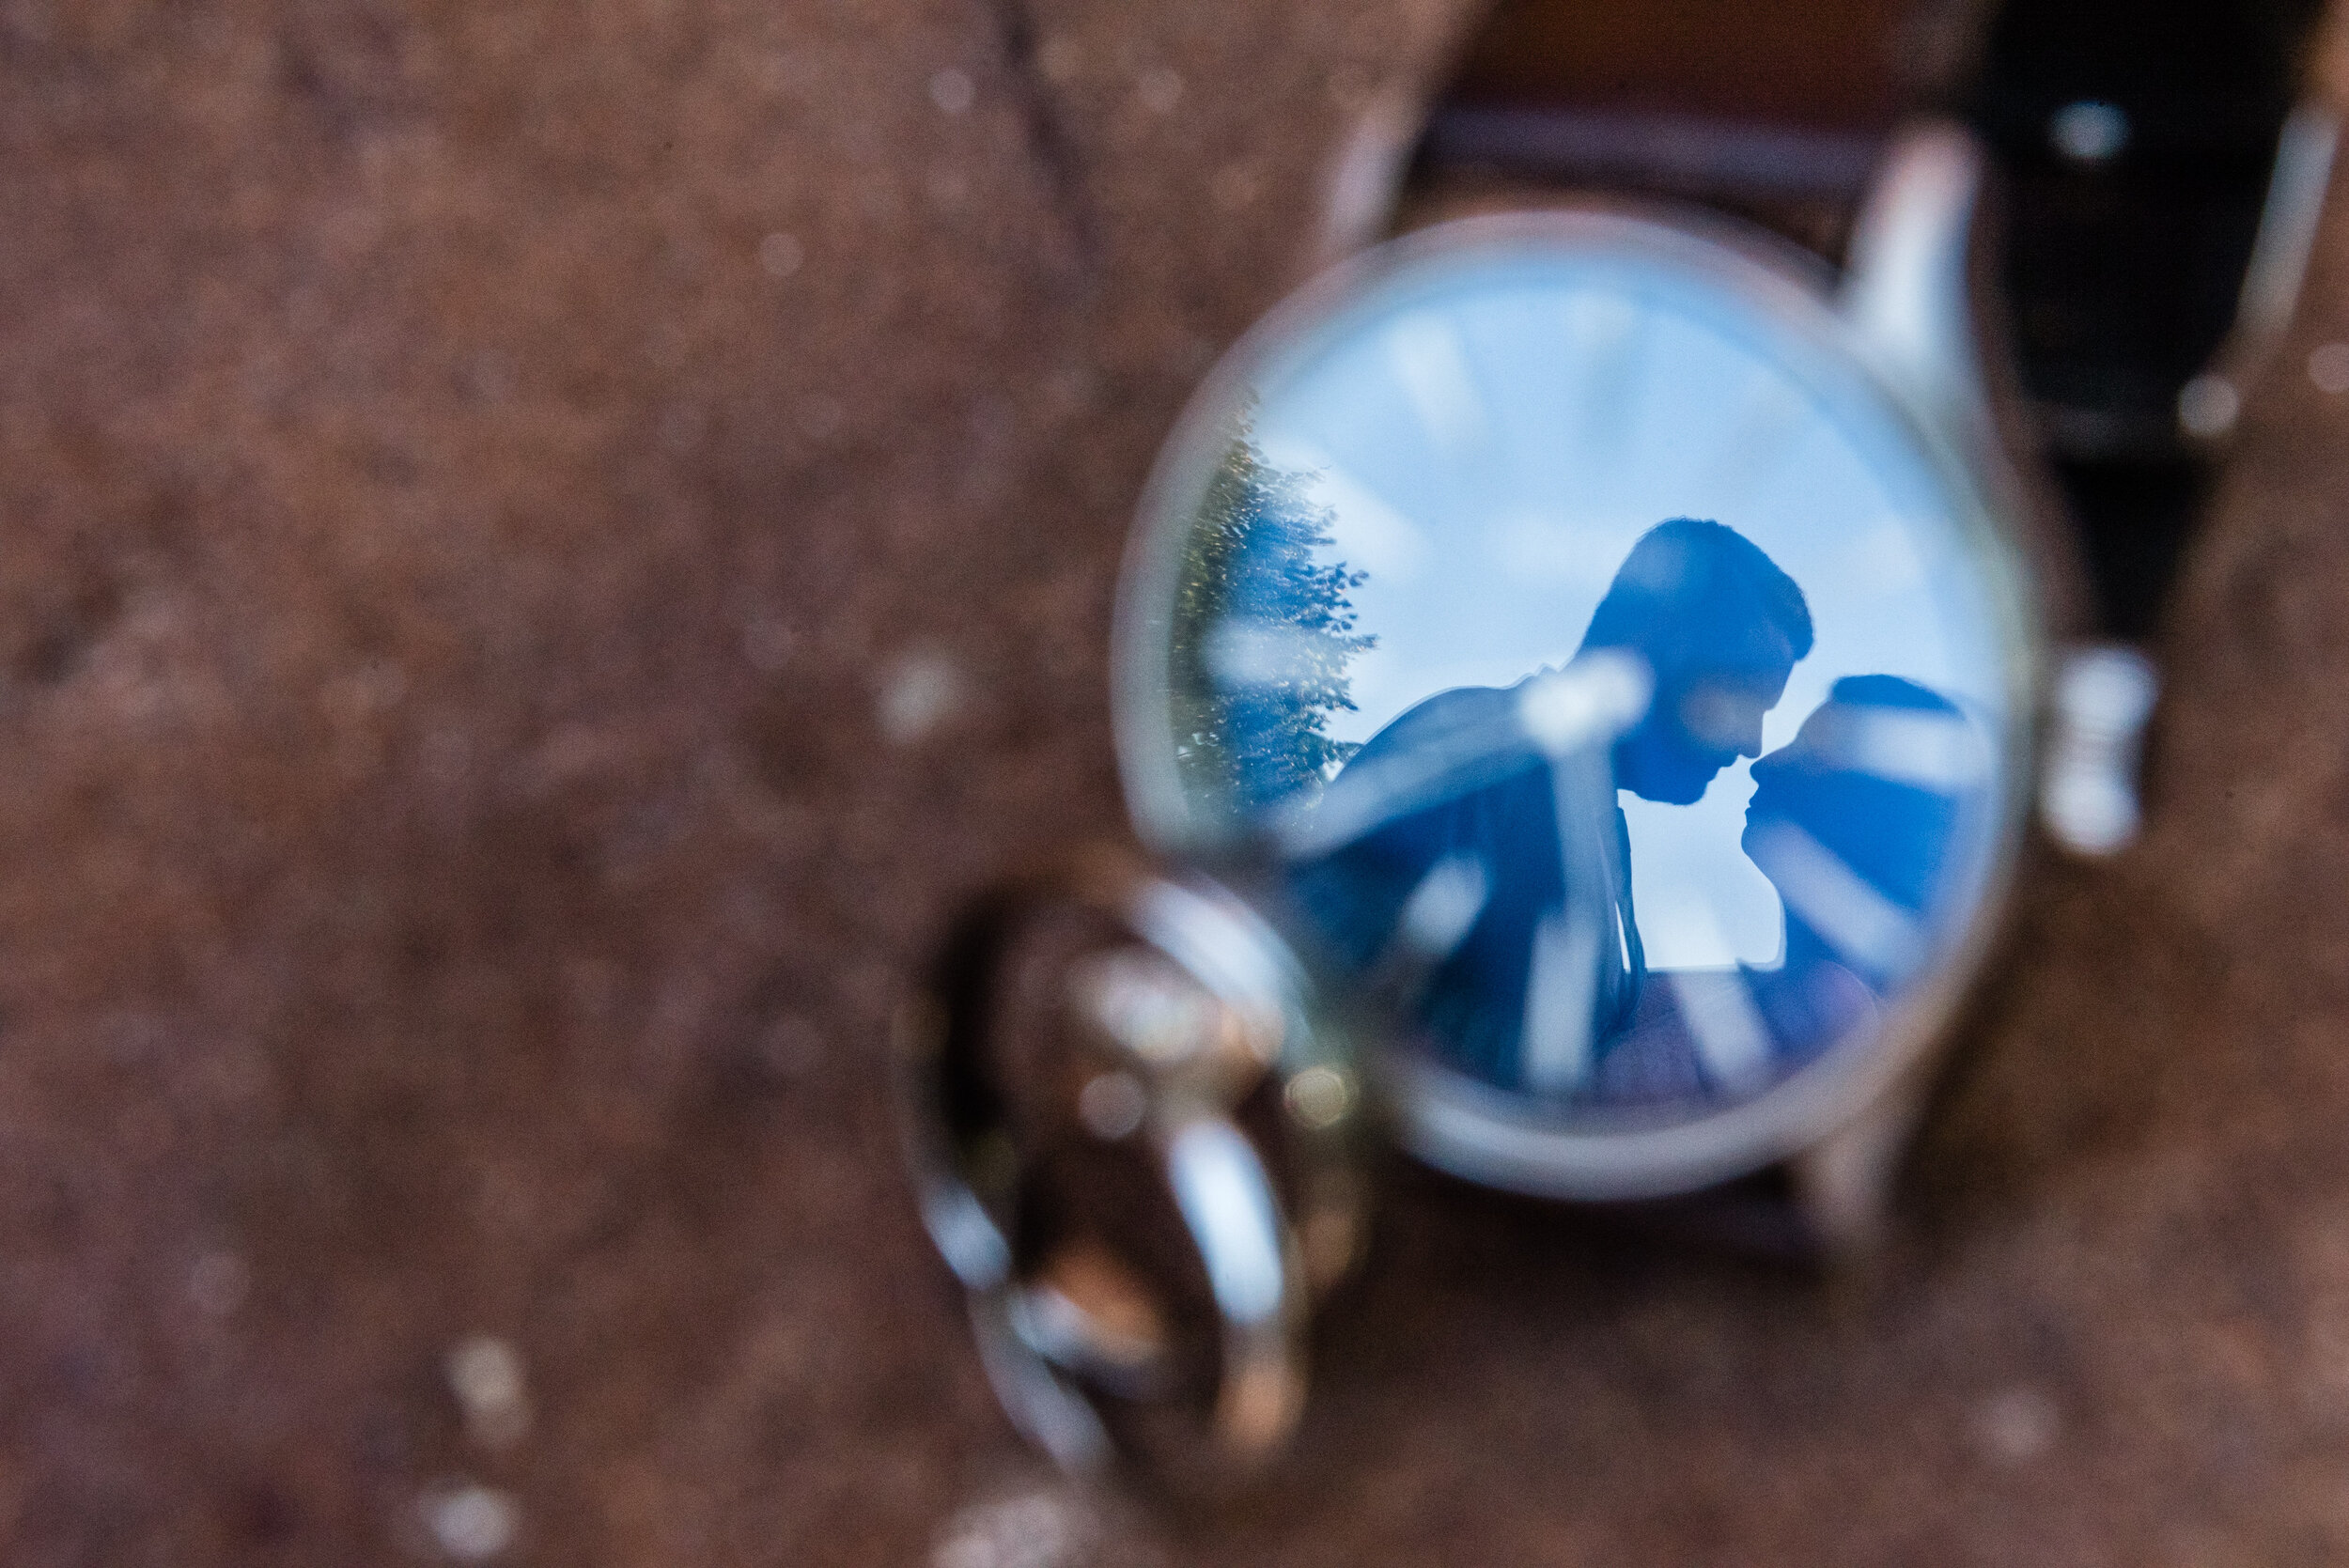 A couples reflection in a time piece